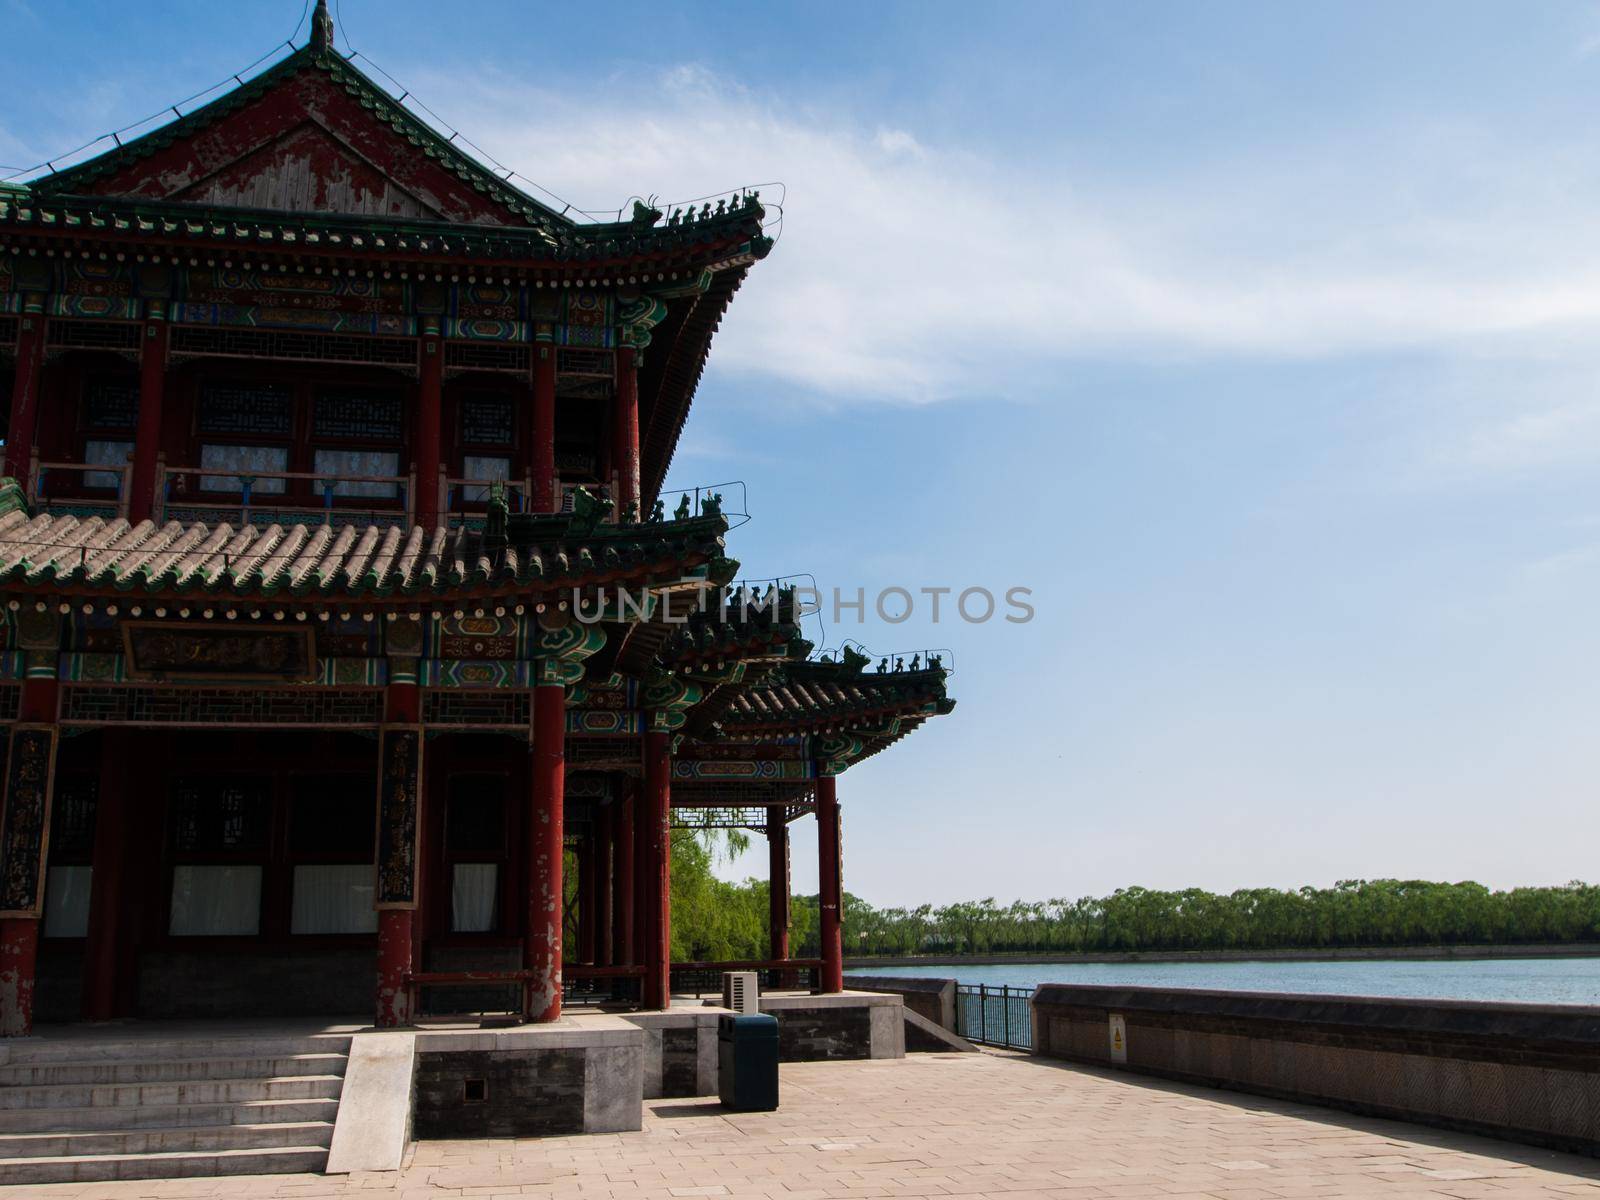 Temple in Summer Palace in Beijing, China.